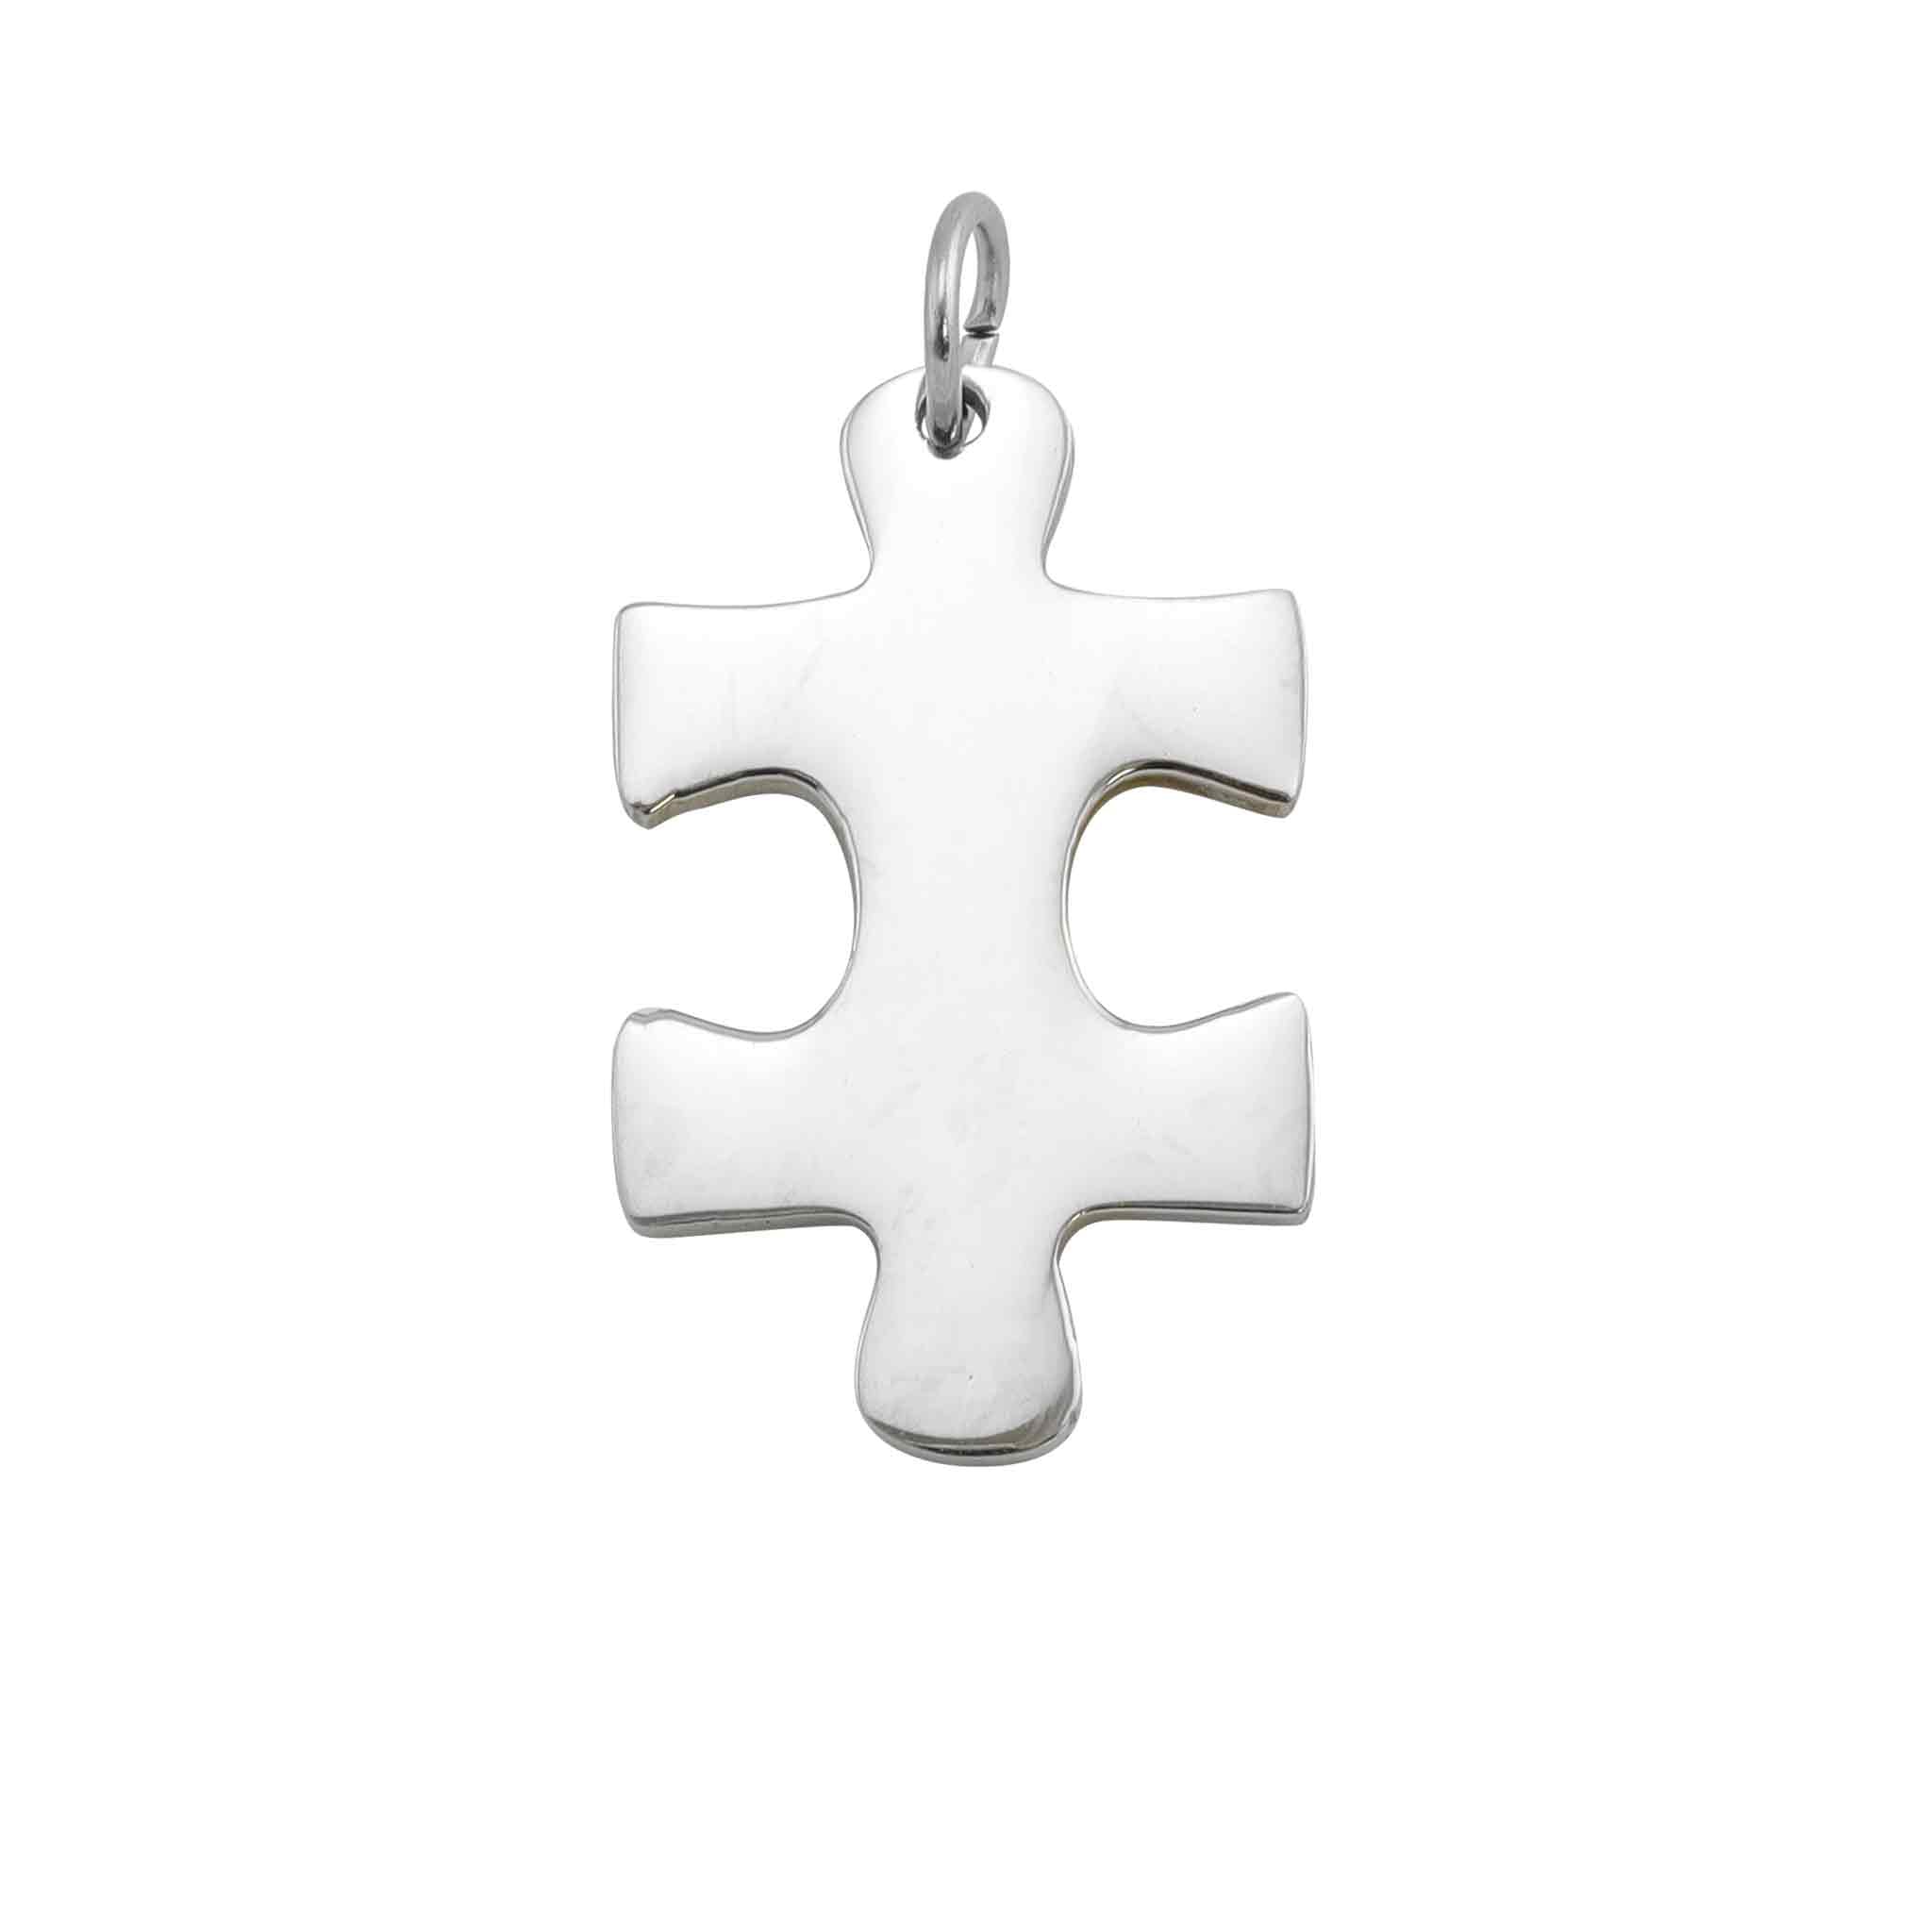 10 Pack - Polished Blank Vertical Stainless Steel Puzzle Piece / SBB0027